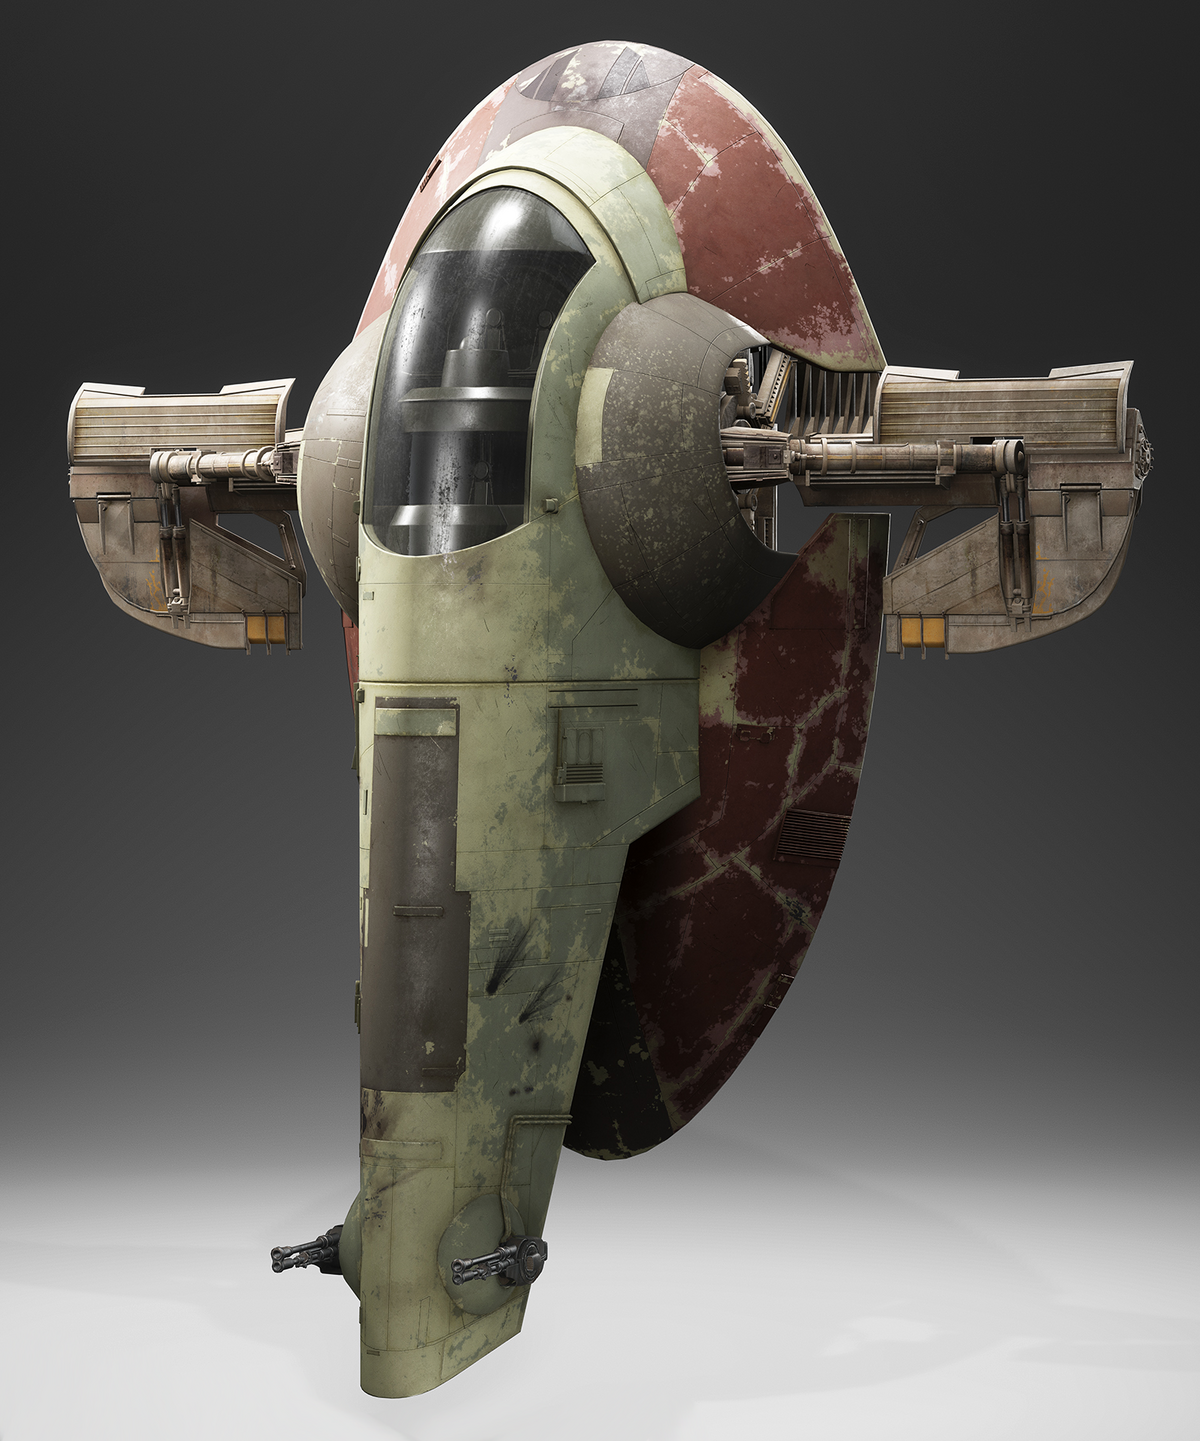 https://static.wikia.nocookie.net/boba-fett-open-seasons/images/b/b4/IMG_0034.PNG/revision/latest/scale-to-width-down/1200?cb=20181221202037